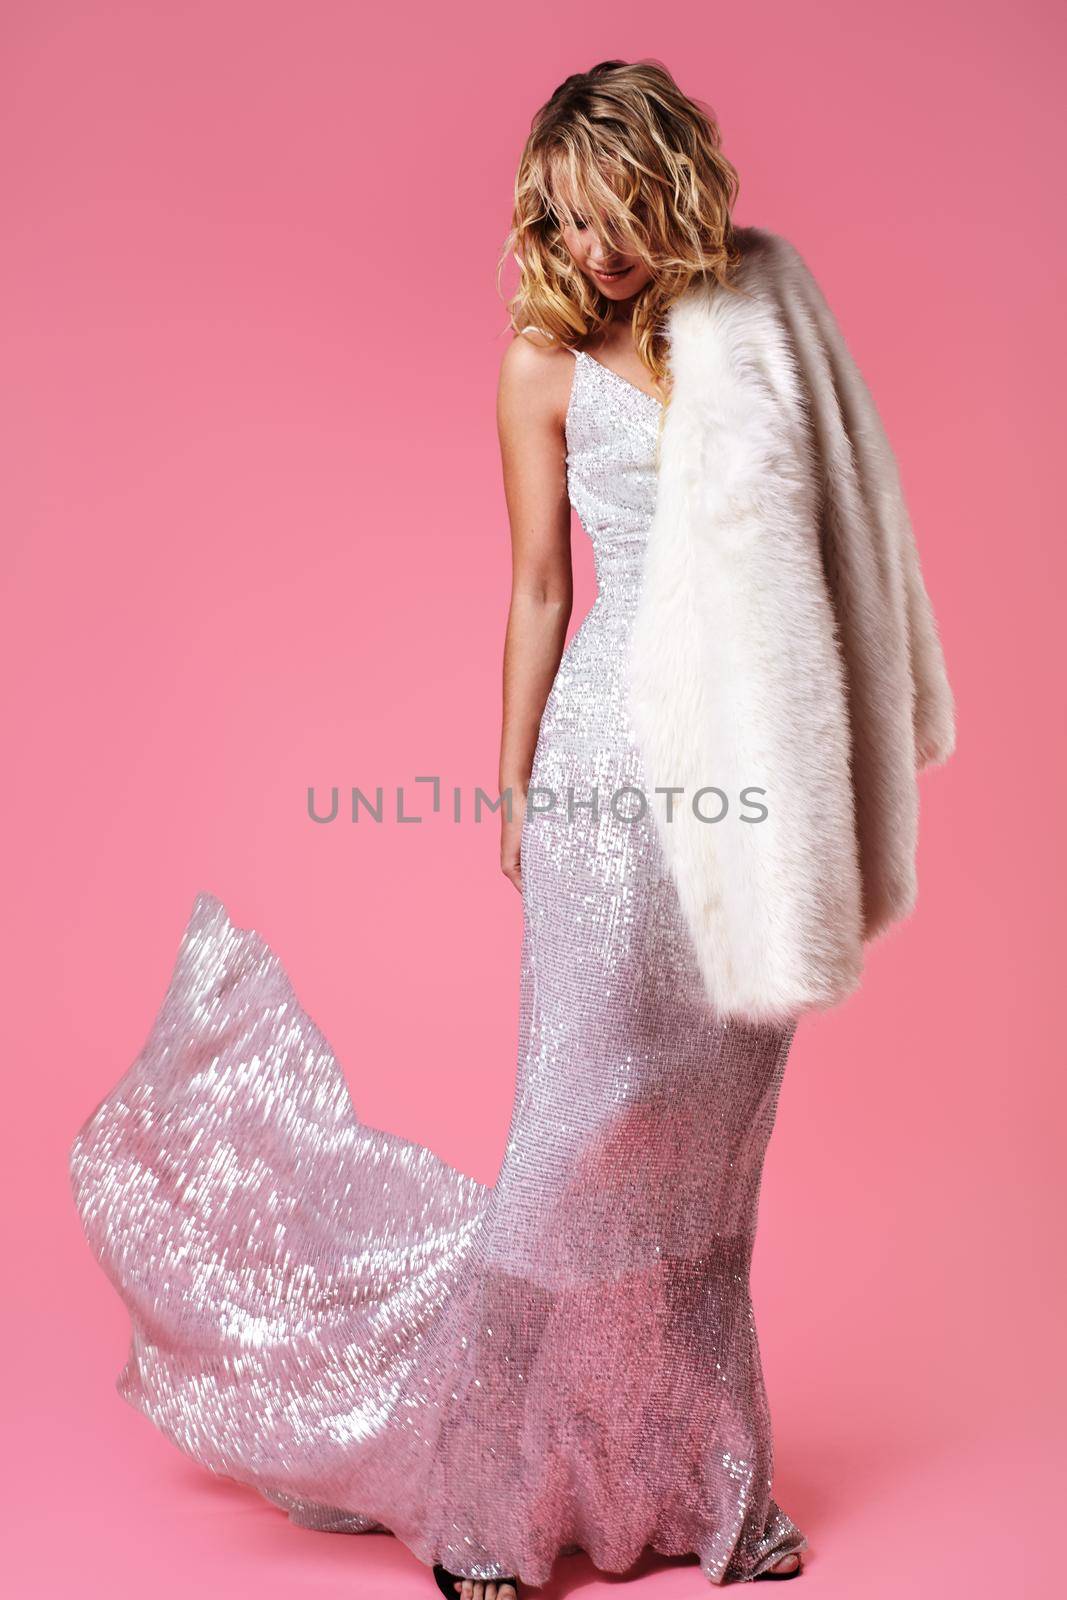 Young Lady in Fashion Dress and Fur Coat. Sexy Woman Posing on Pink Background in Luxury Fashionable Clothes and Shoes. Glamour Style